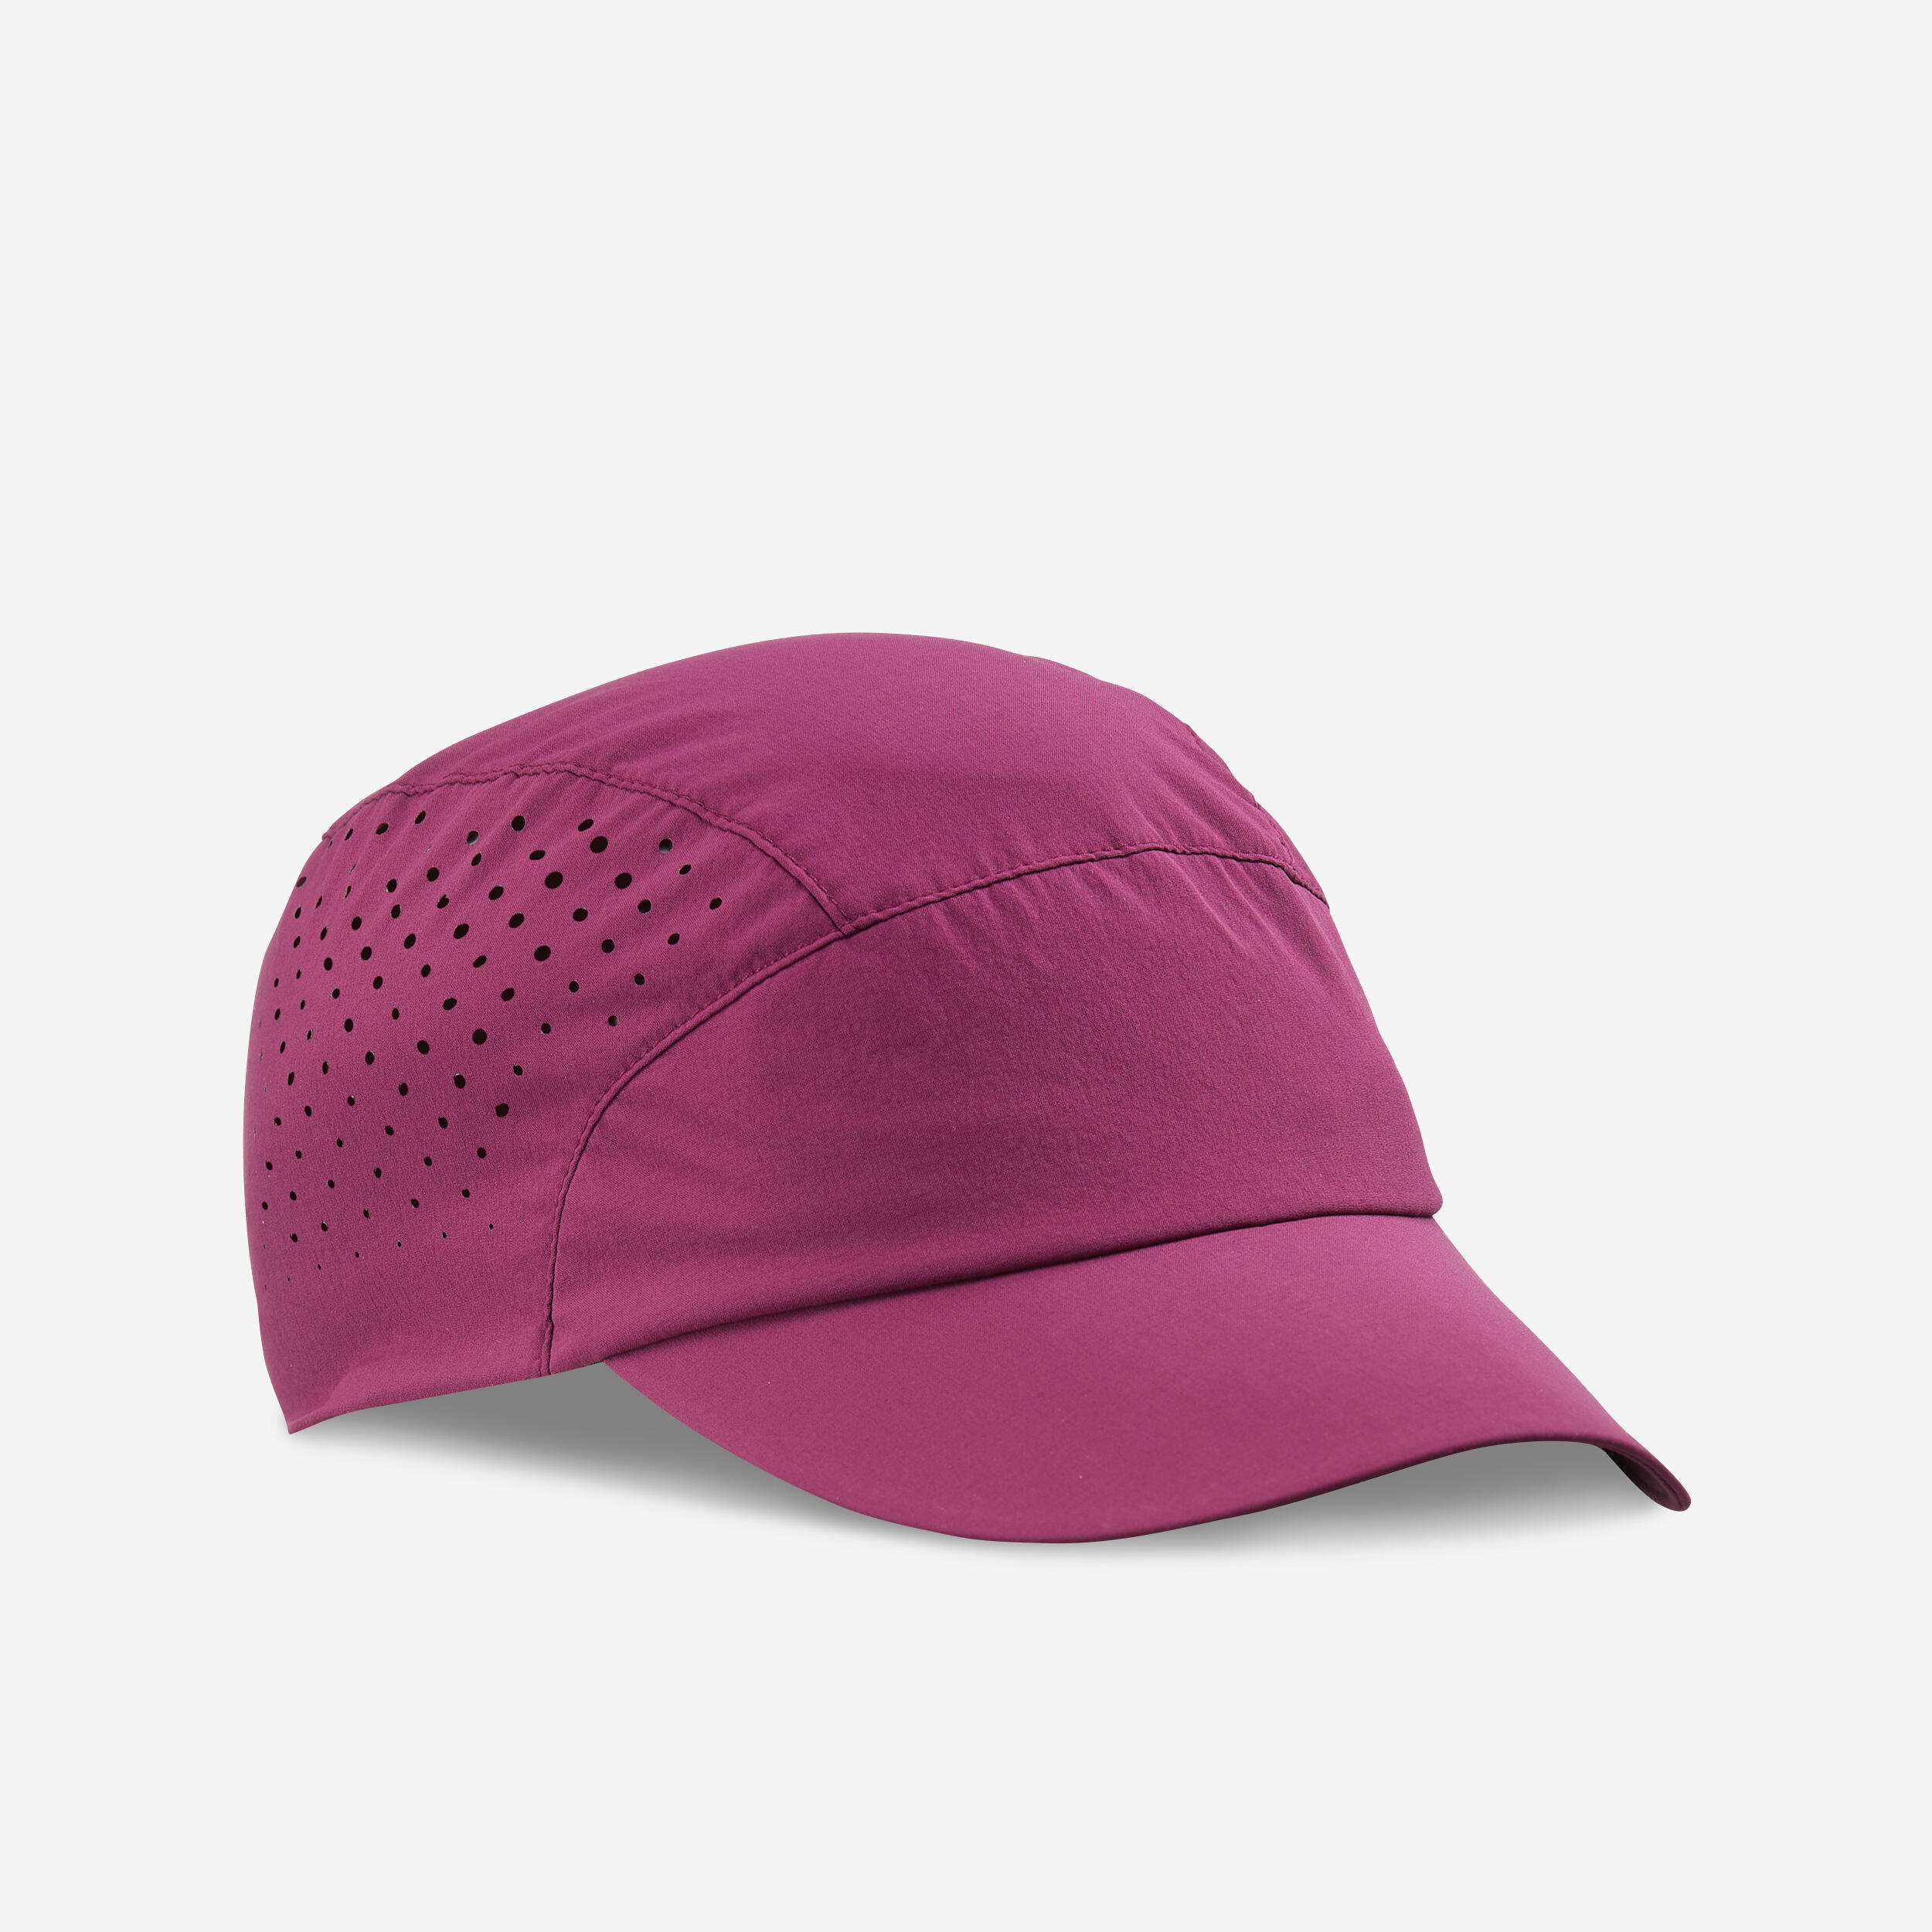 Ventilated and Ultra Compact Cap - Purple 1/2